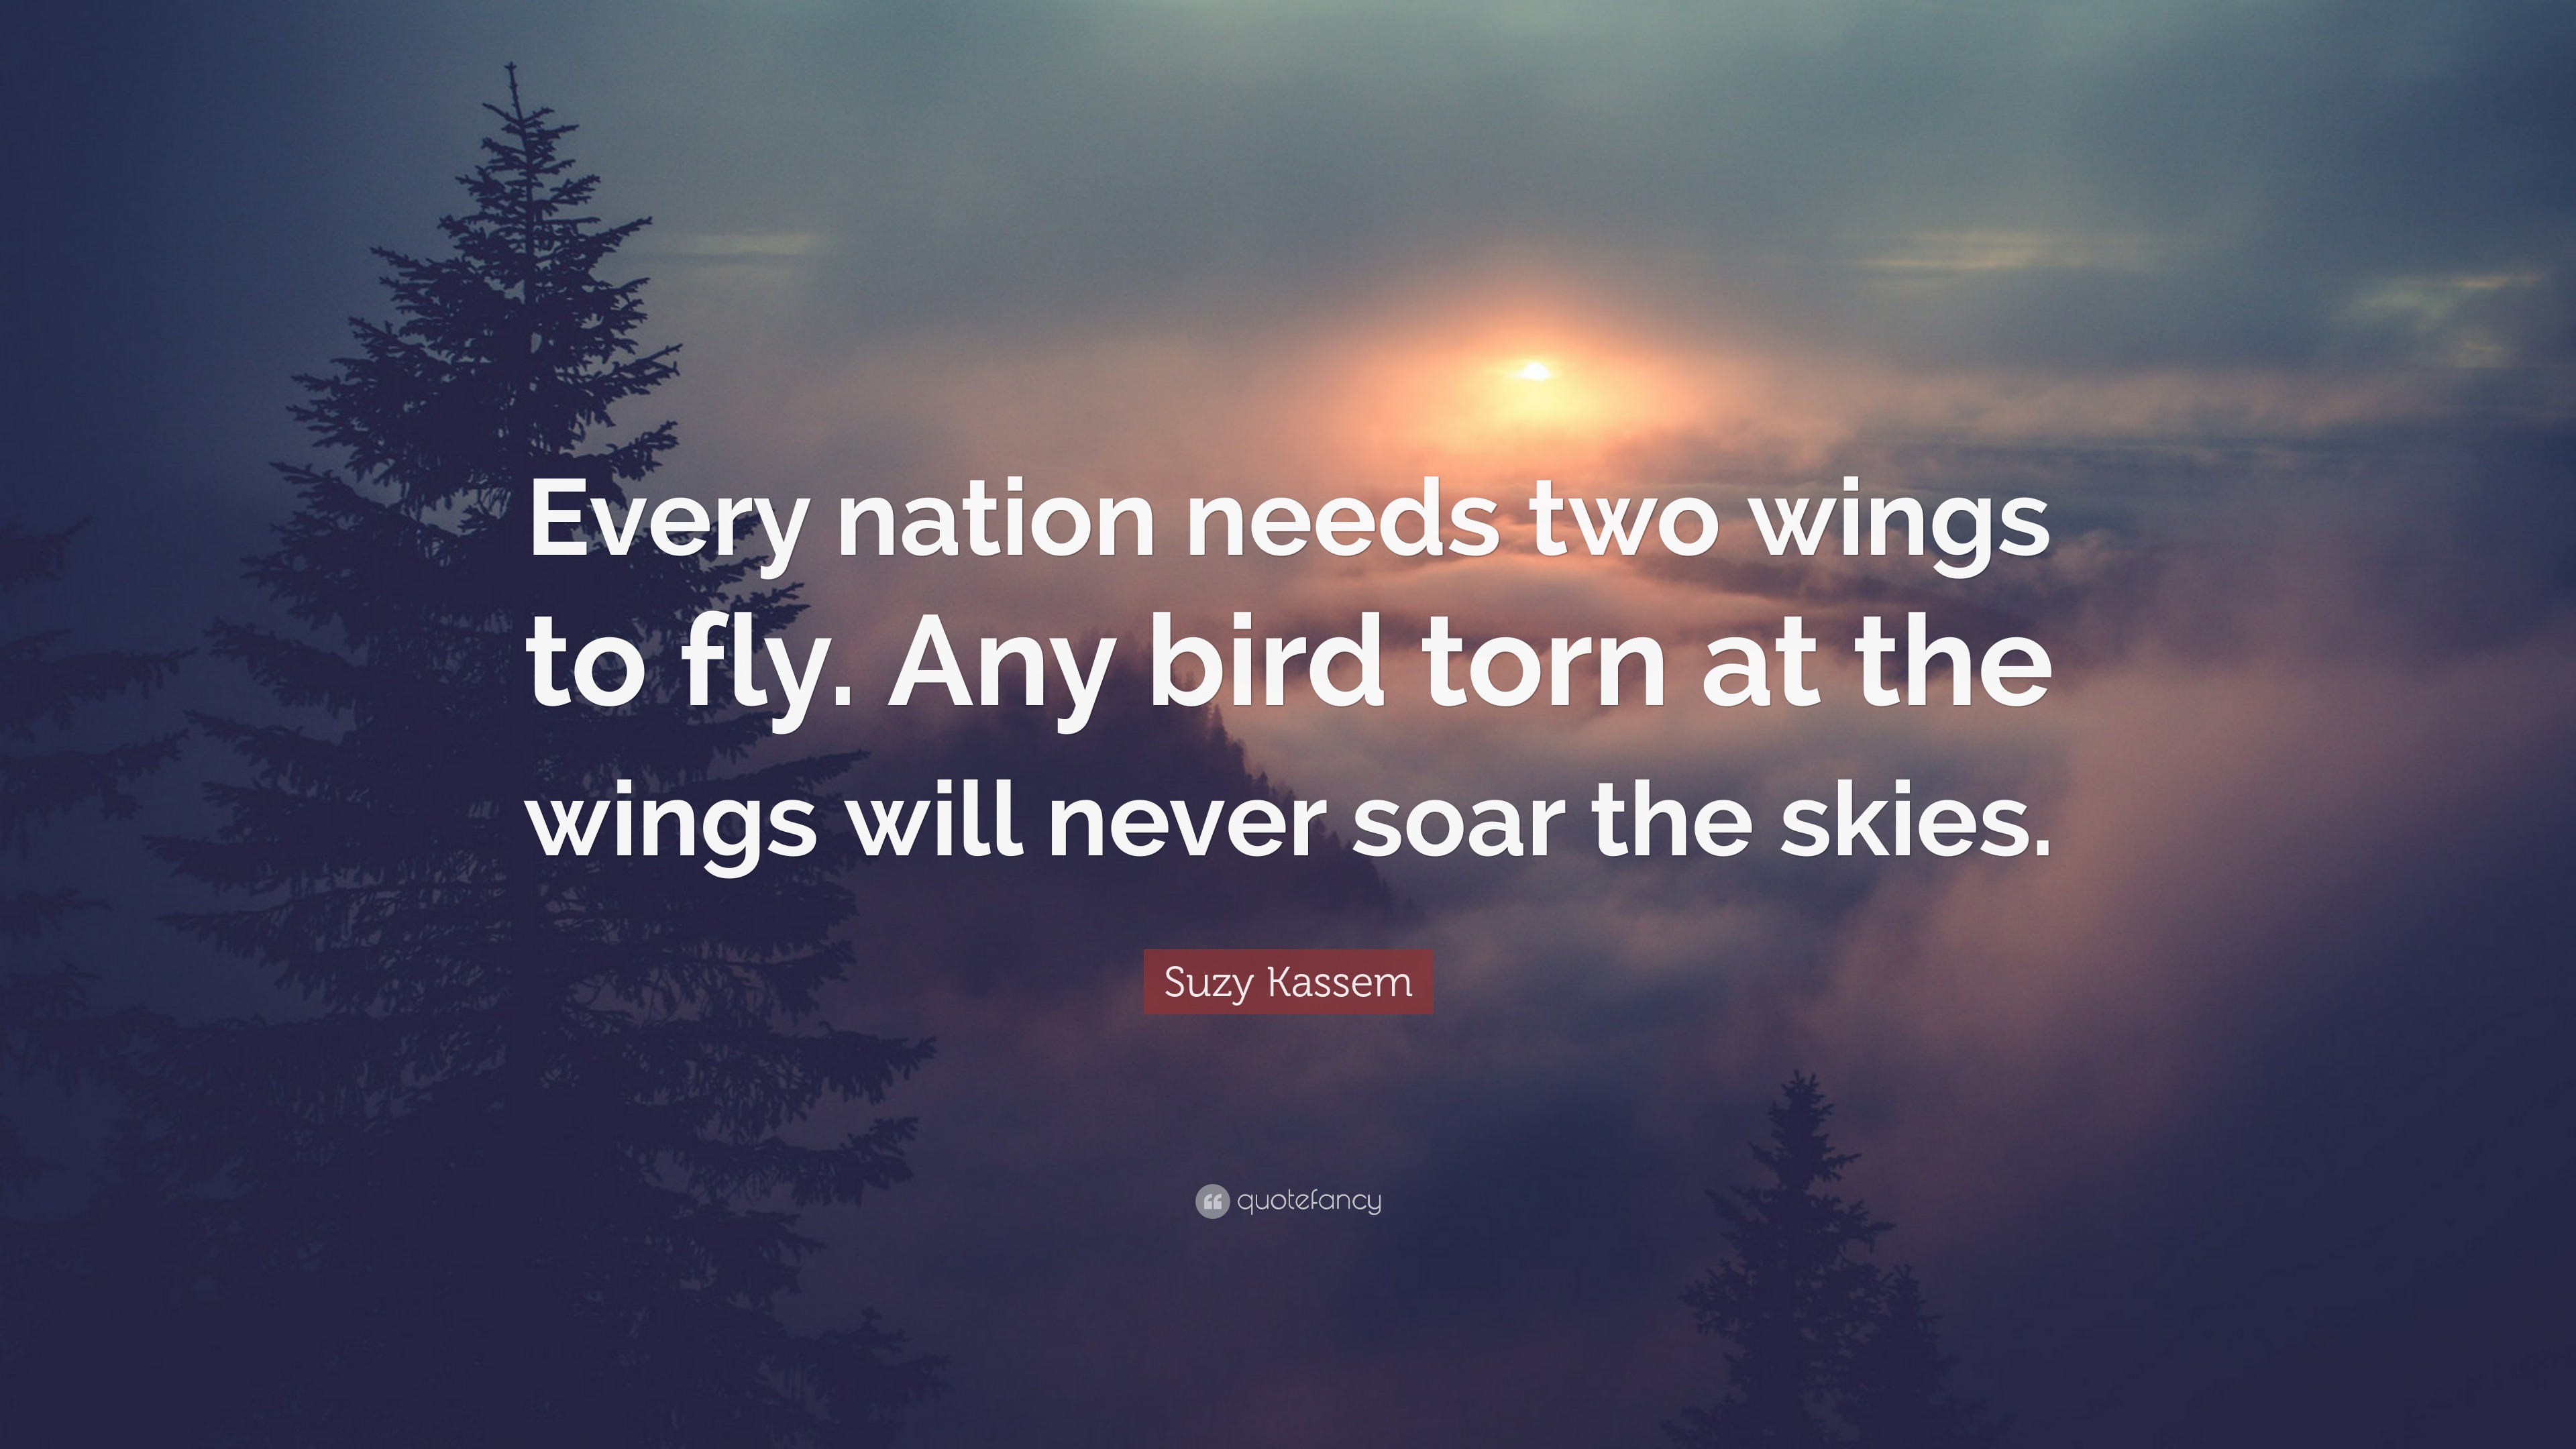 Suzy Kassem Quote: “Every nation needs two wings to fly. Any bird torn ...